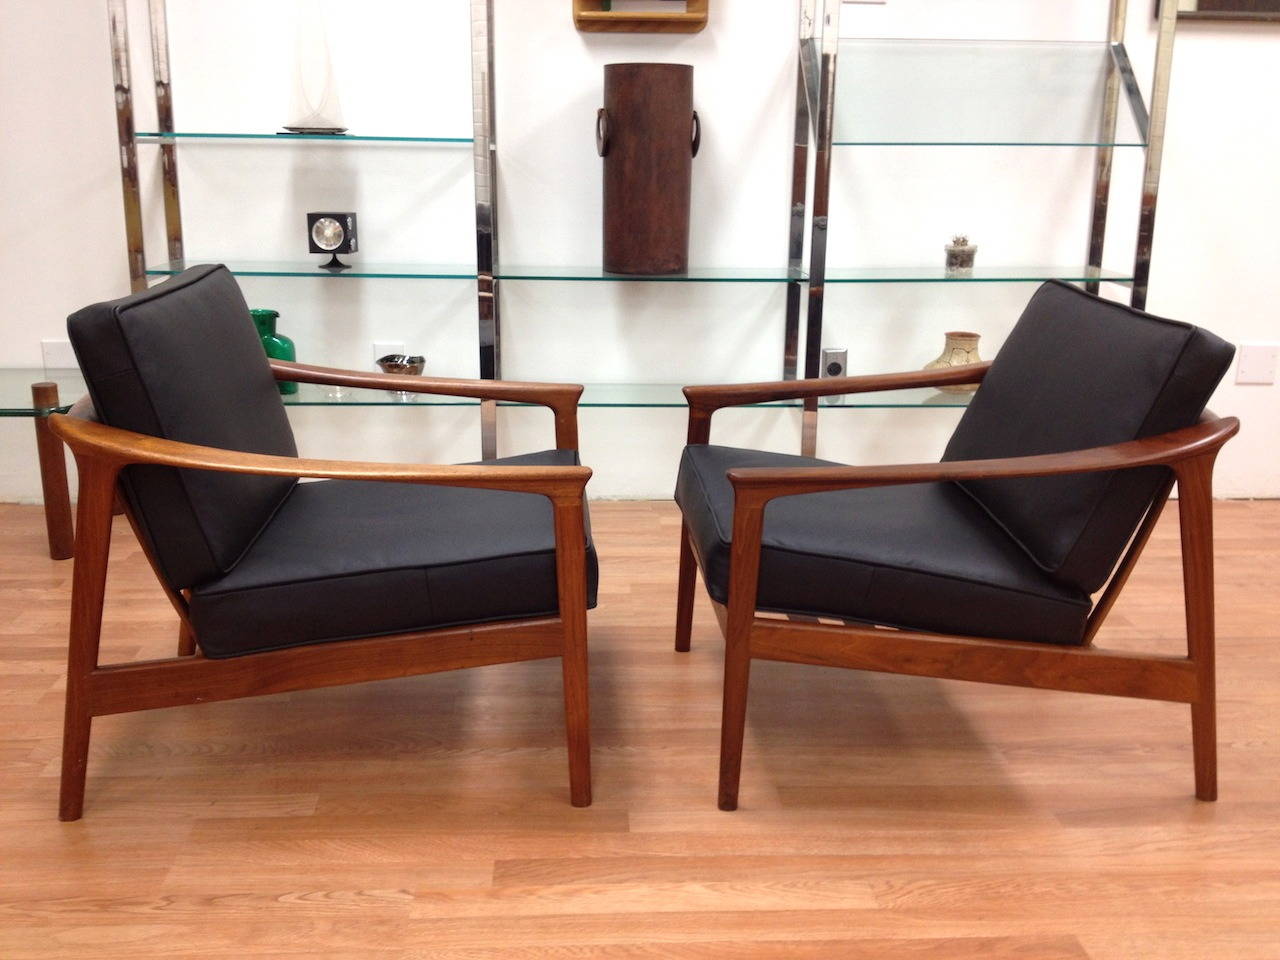 Pair of DUX Danish modern walnut and black leather lounge chairs by Folke Ohlsson. Beautiful walnut frames with brand new straps and quality black leather upholstery. Marked with DUX labels as shown.